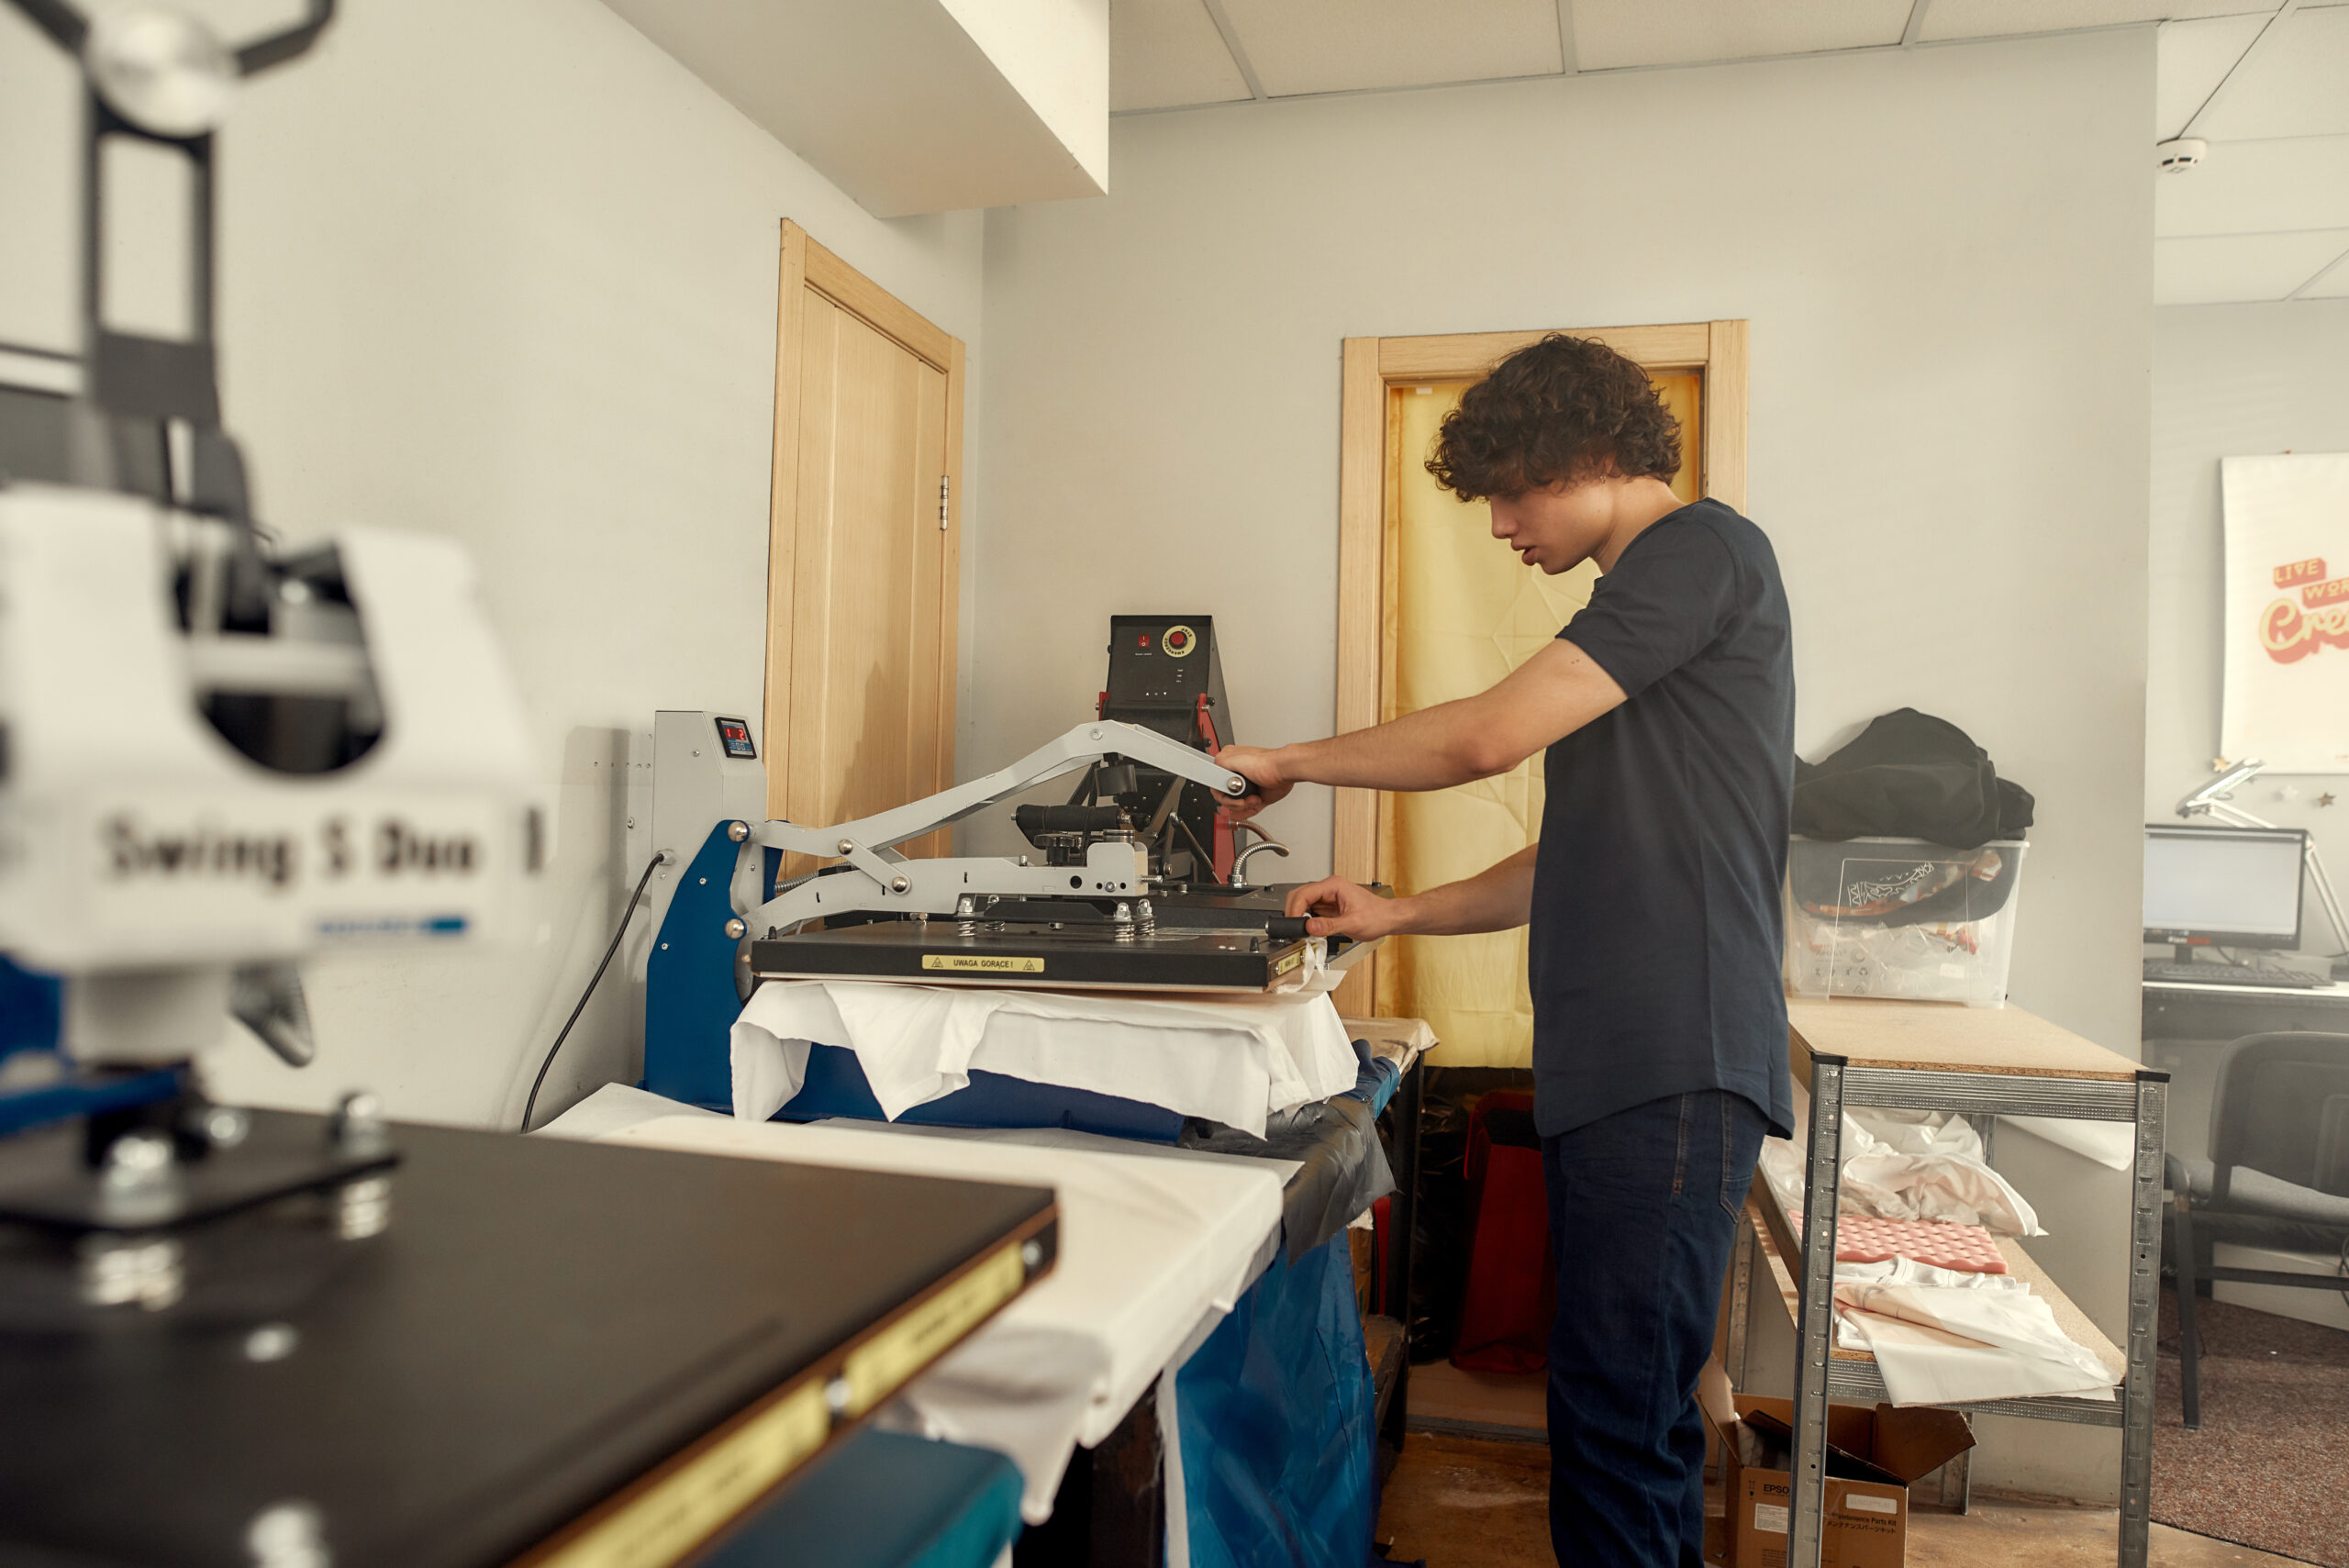 6 Heat Press Printing Accessories To Boost Your Production - ImprintNext  Blog